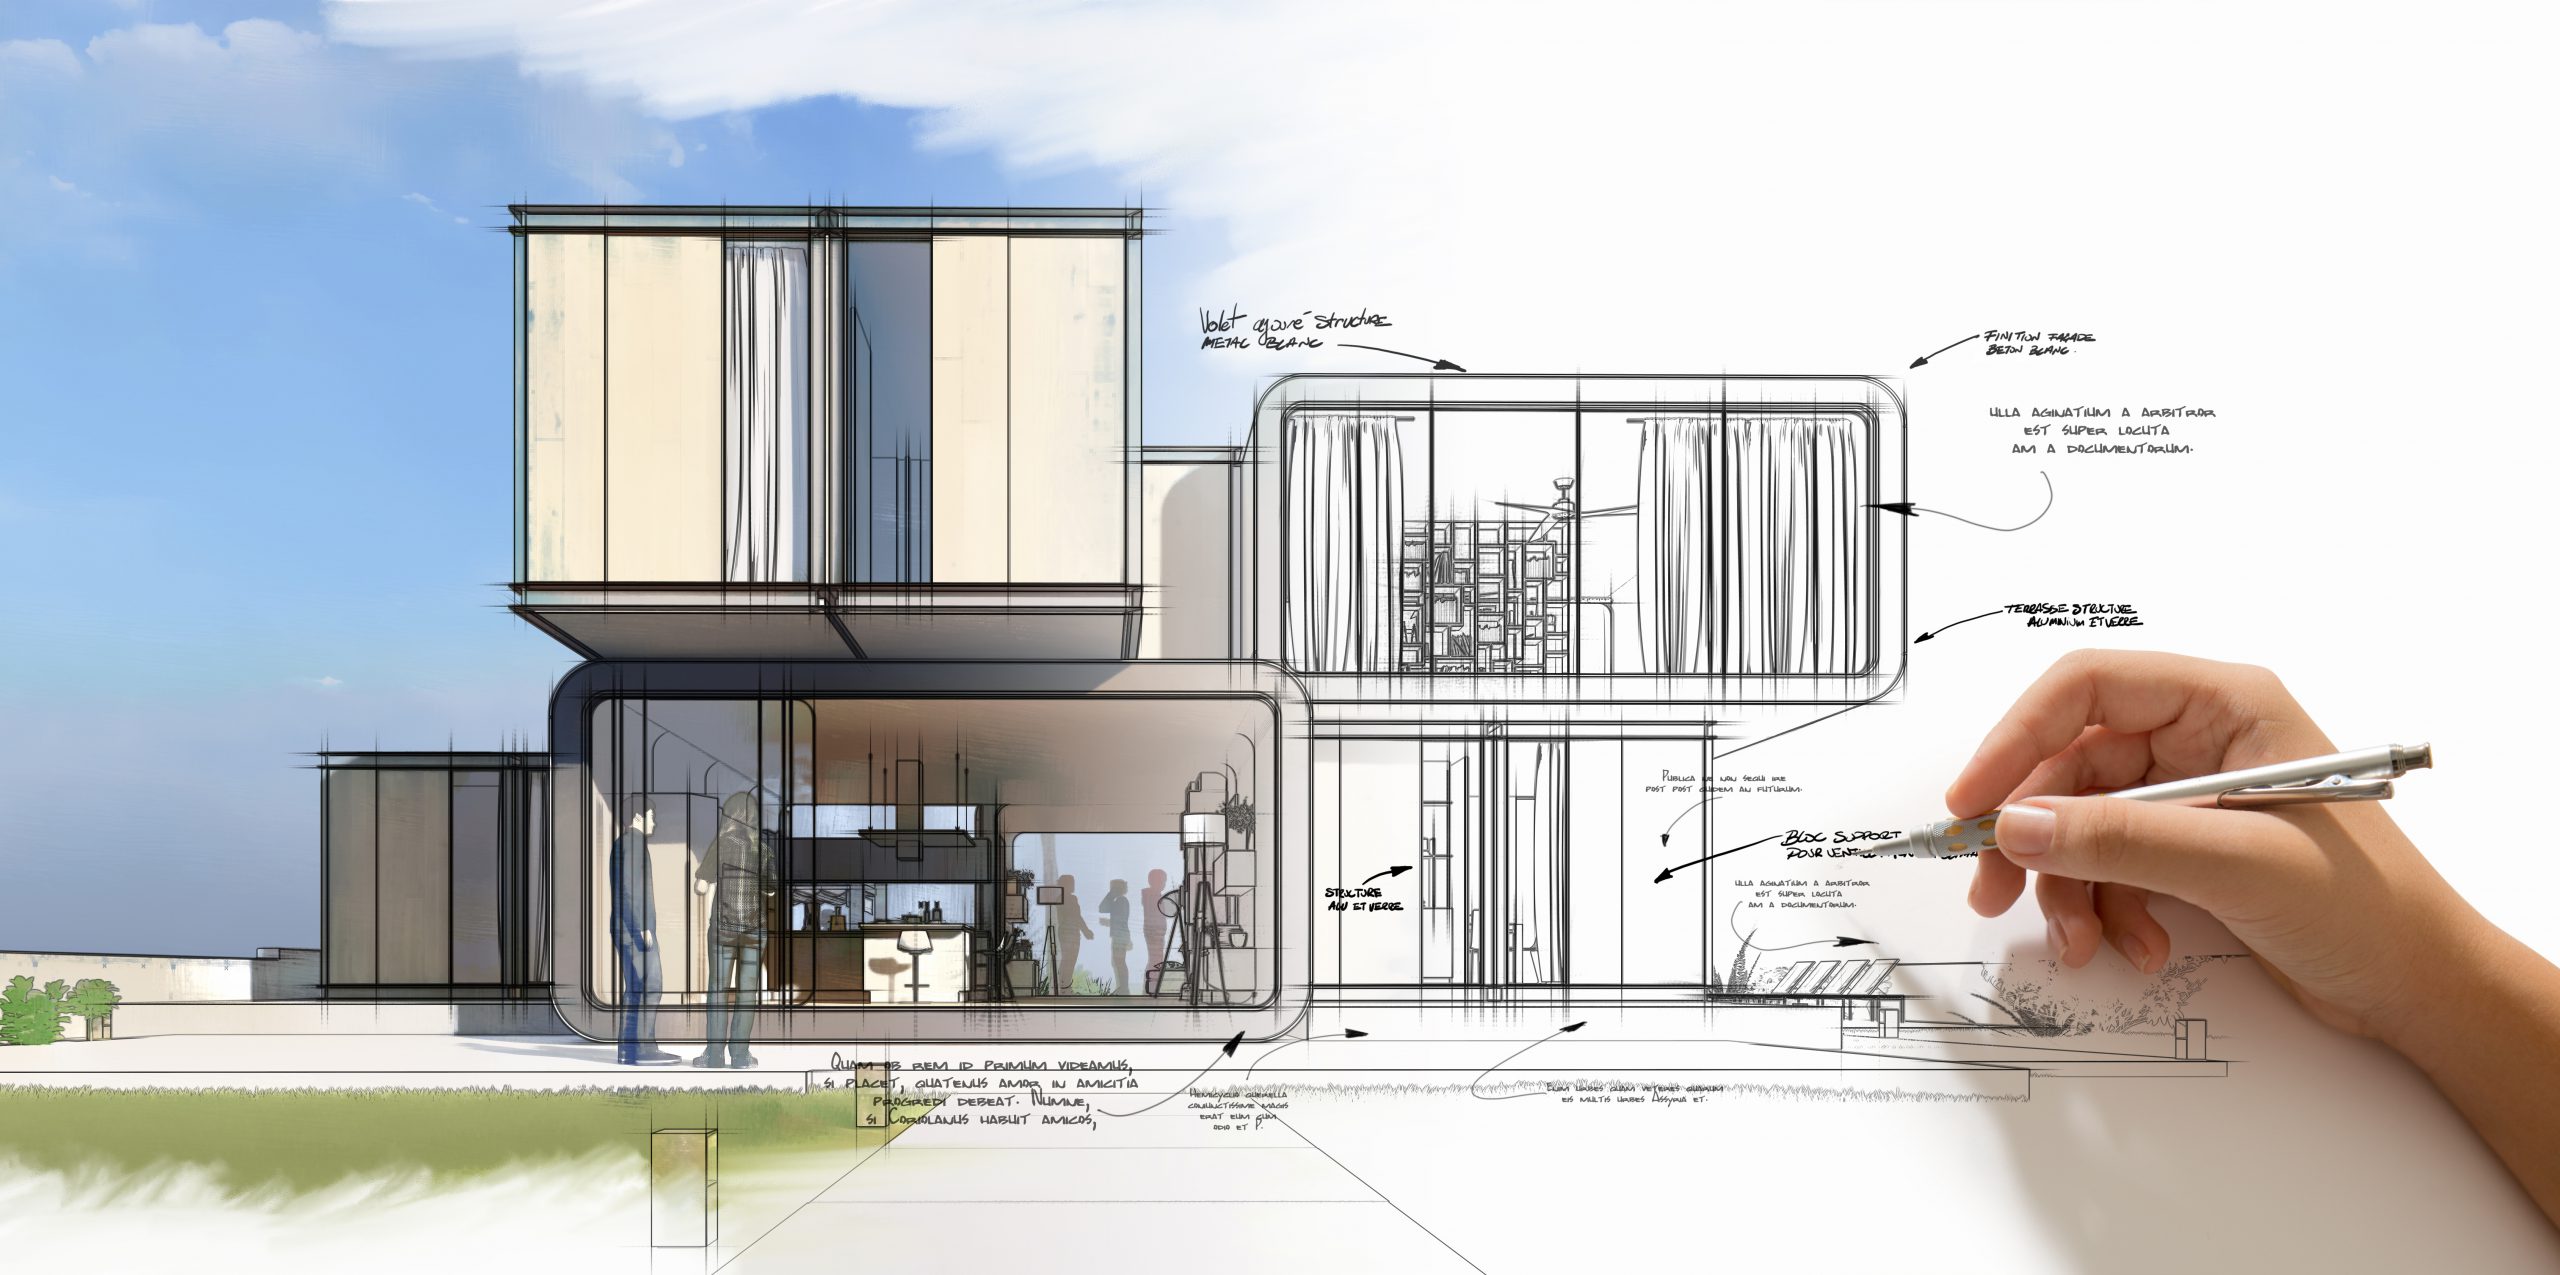 3D rendering of the architecture creative process, from hand drafting to ended project